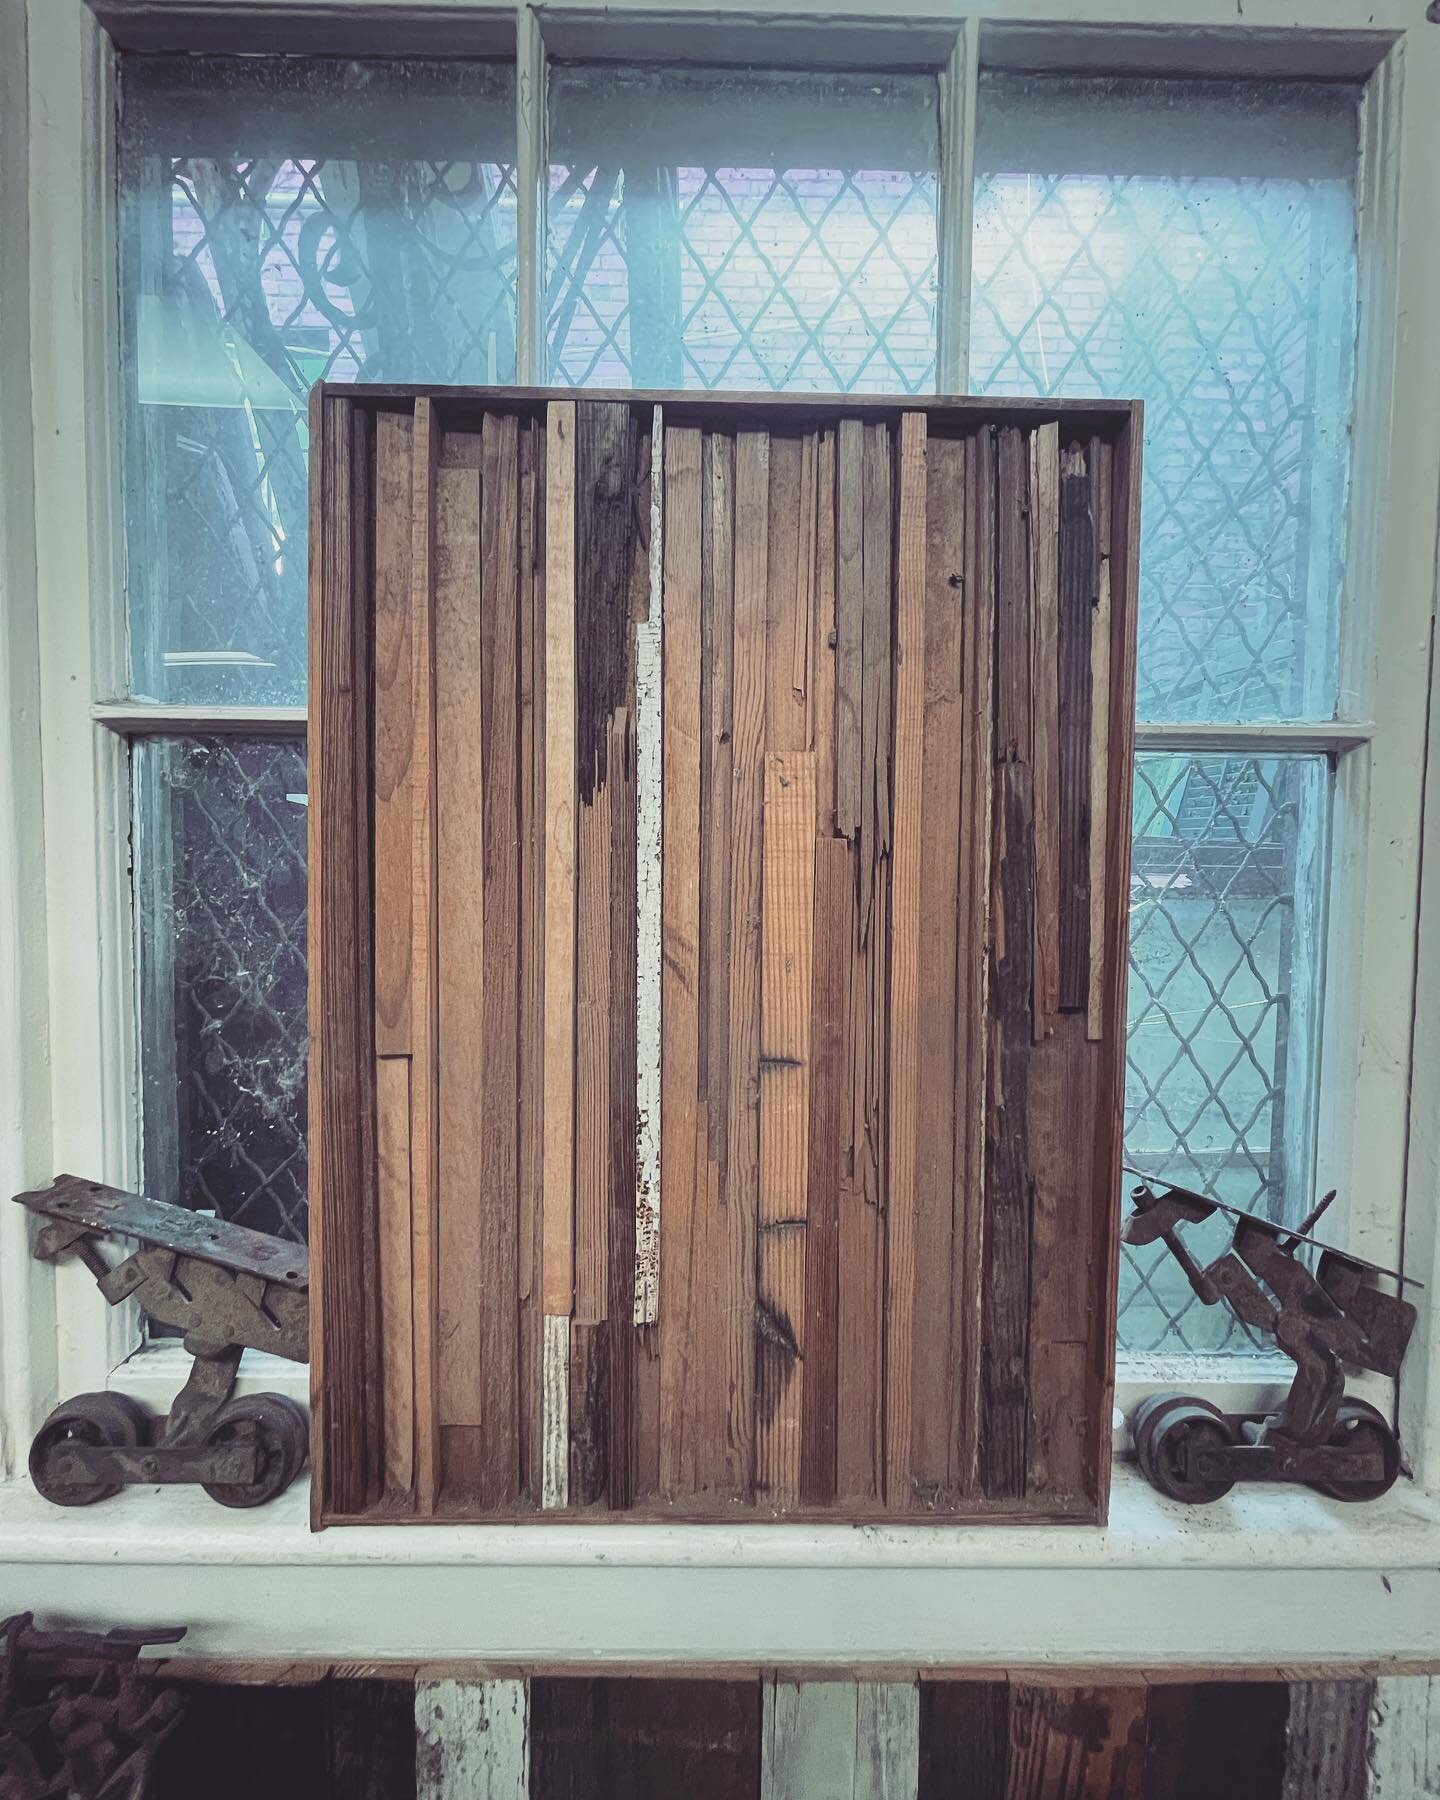 This peice fits nicely in a variety of spaces including our office lobby. Made from wood scraps around the shop. #sustainabledesign #reclaimedwood #aroundtheshop #art #woodart